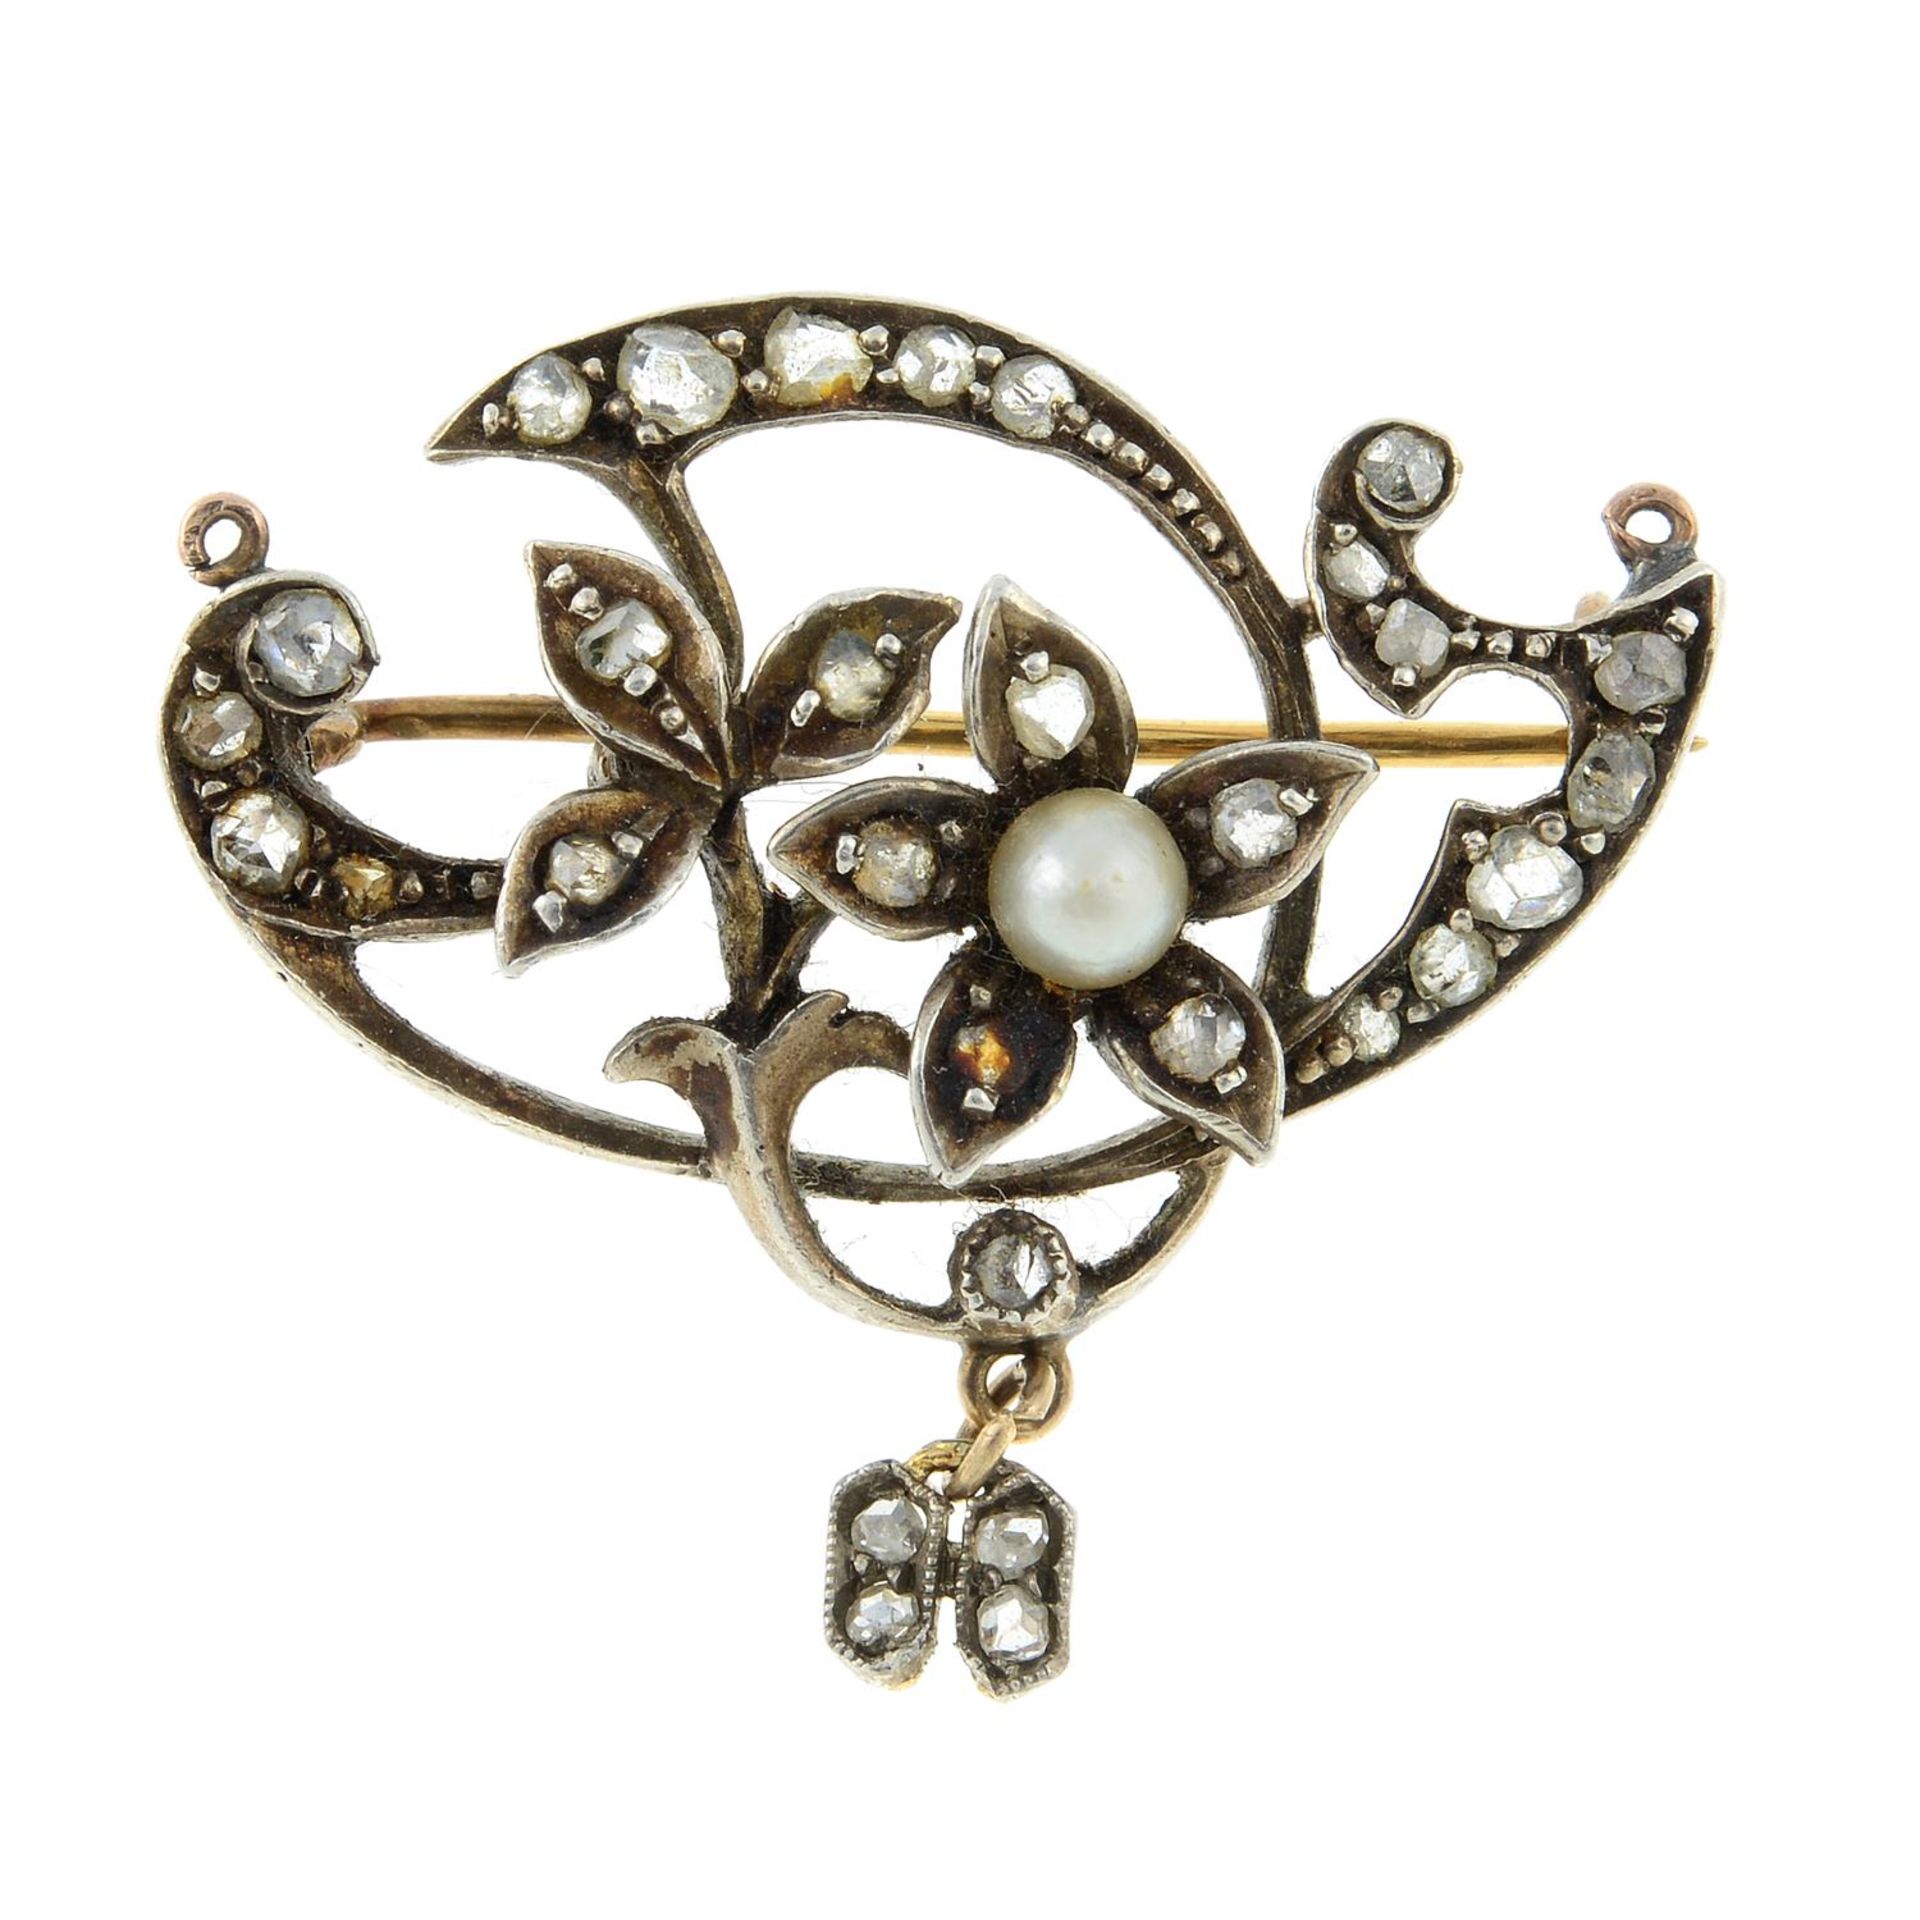 An early 20th century seed pearl and rose-cut diamond floral brooch.